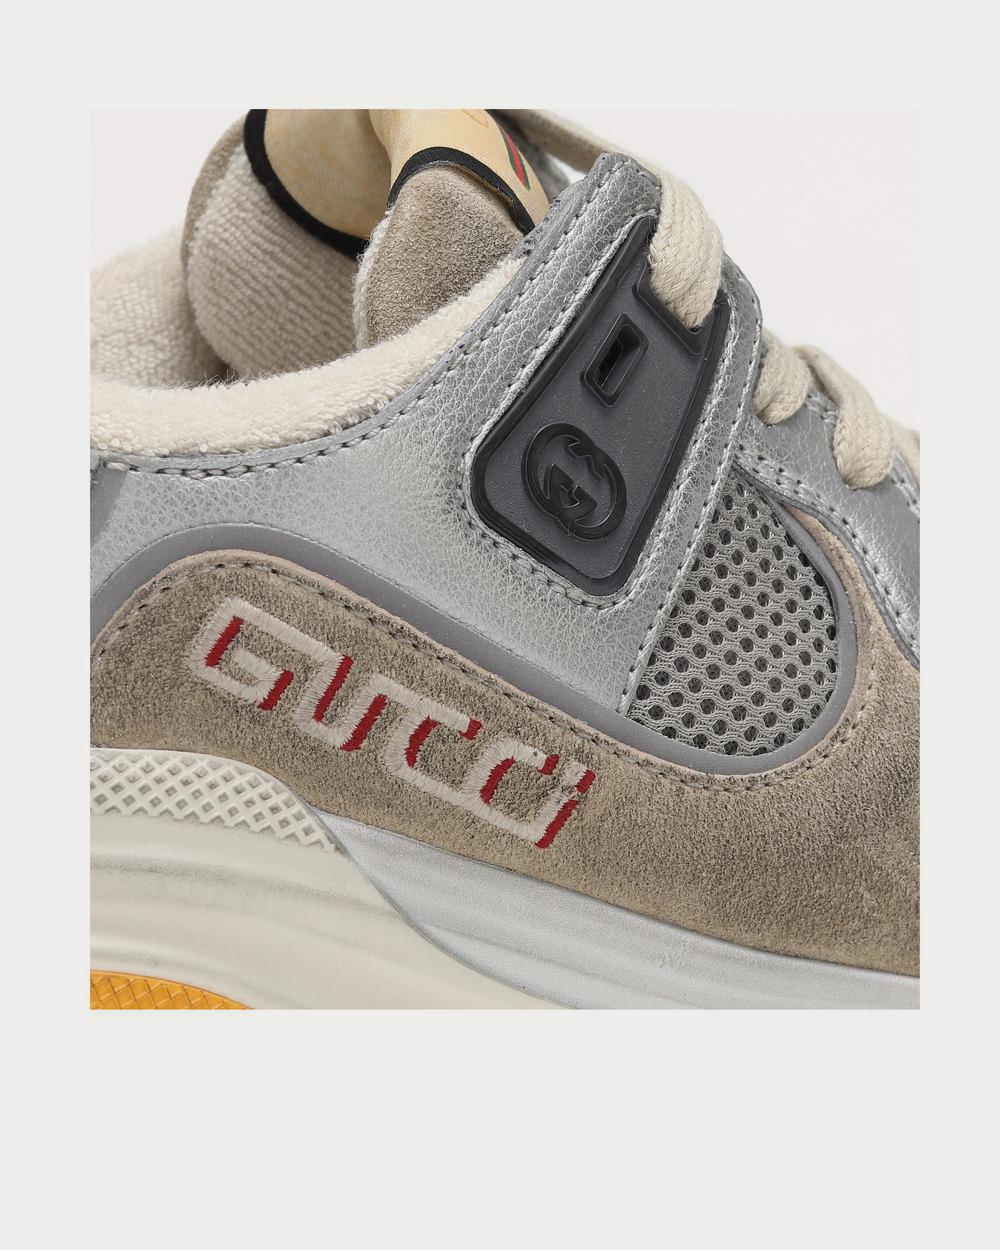 Gucci - Ultrapace leather Grey Low Top Sneakers